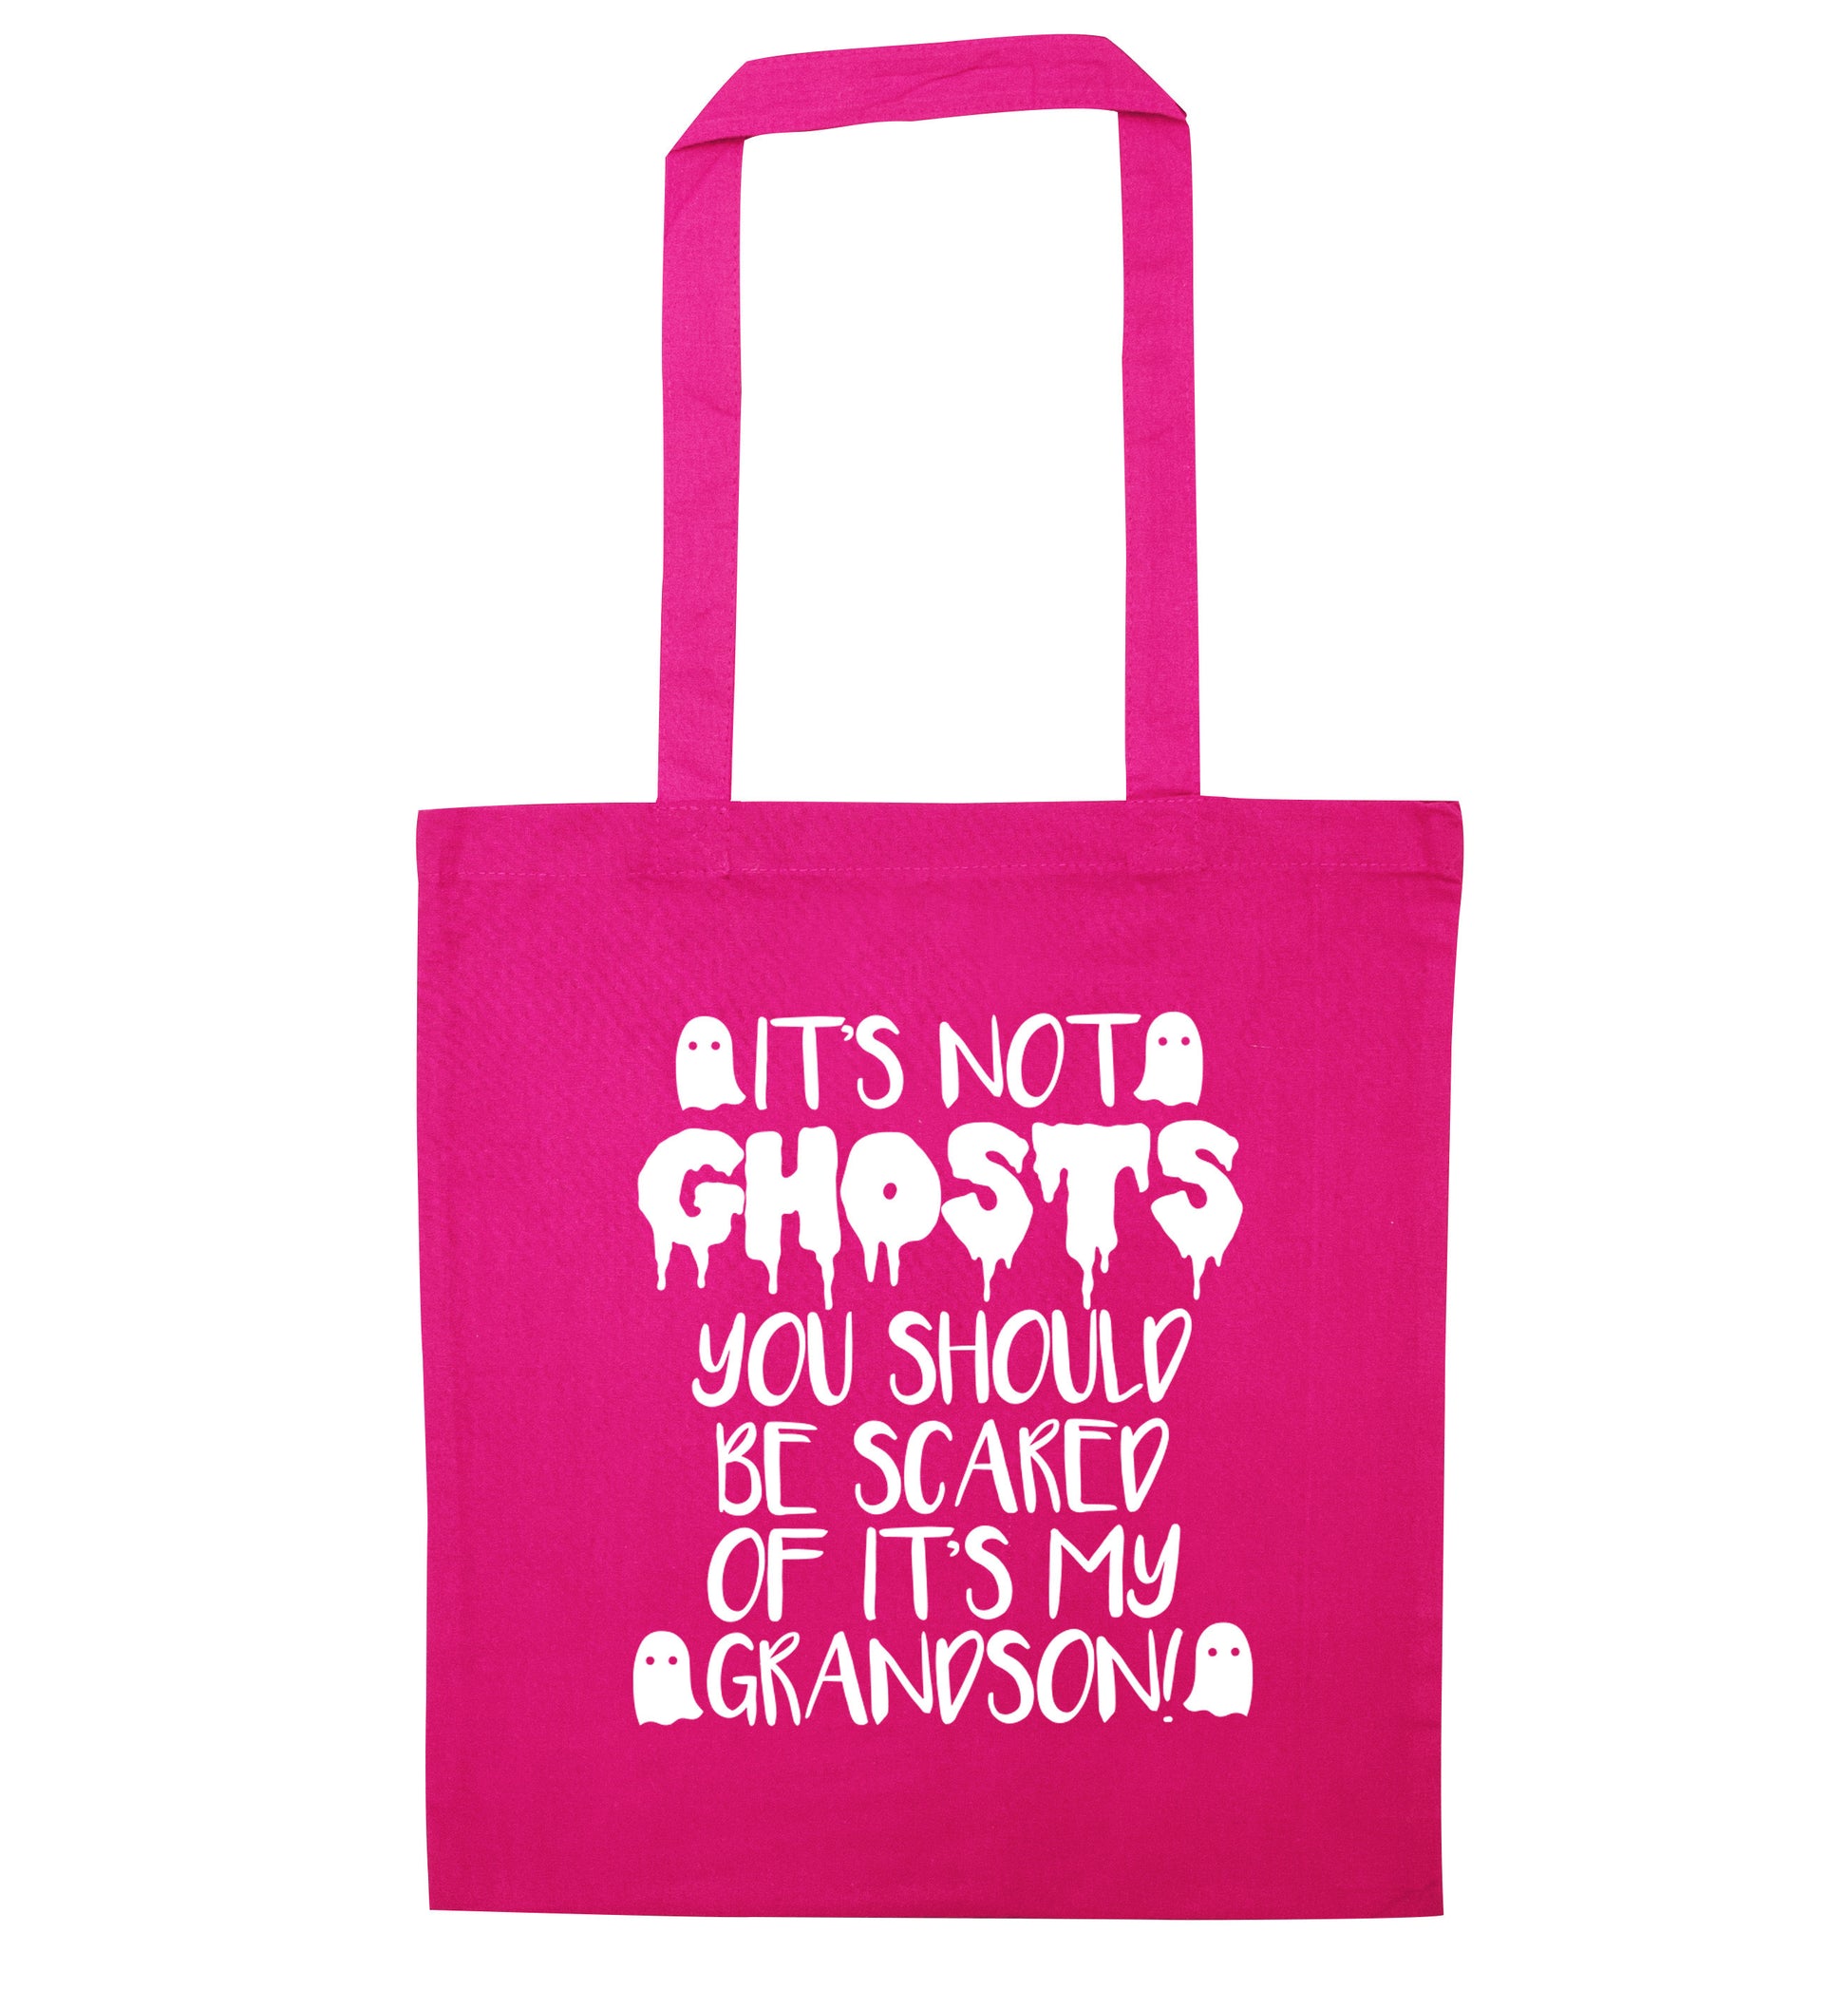 It's not ghosts you should be scared of it's my grandson! pink tote bag